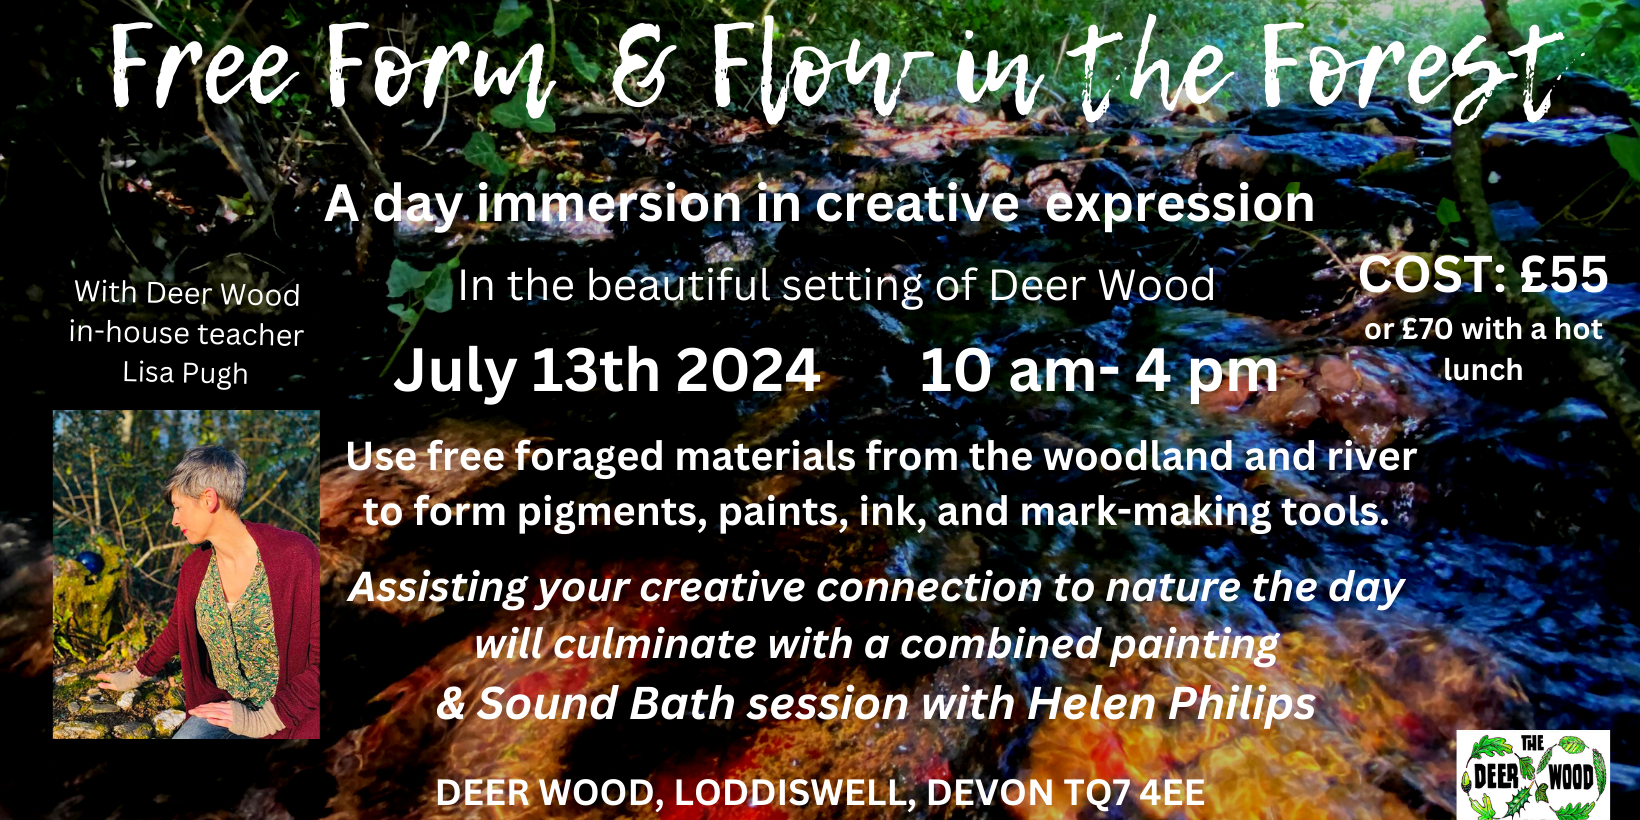 Free Form & Flow - Natural Paintmaking & Sound Journey